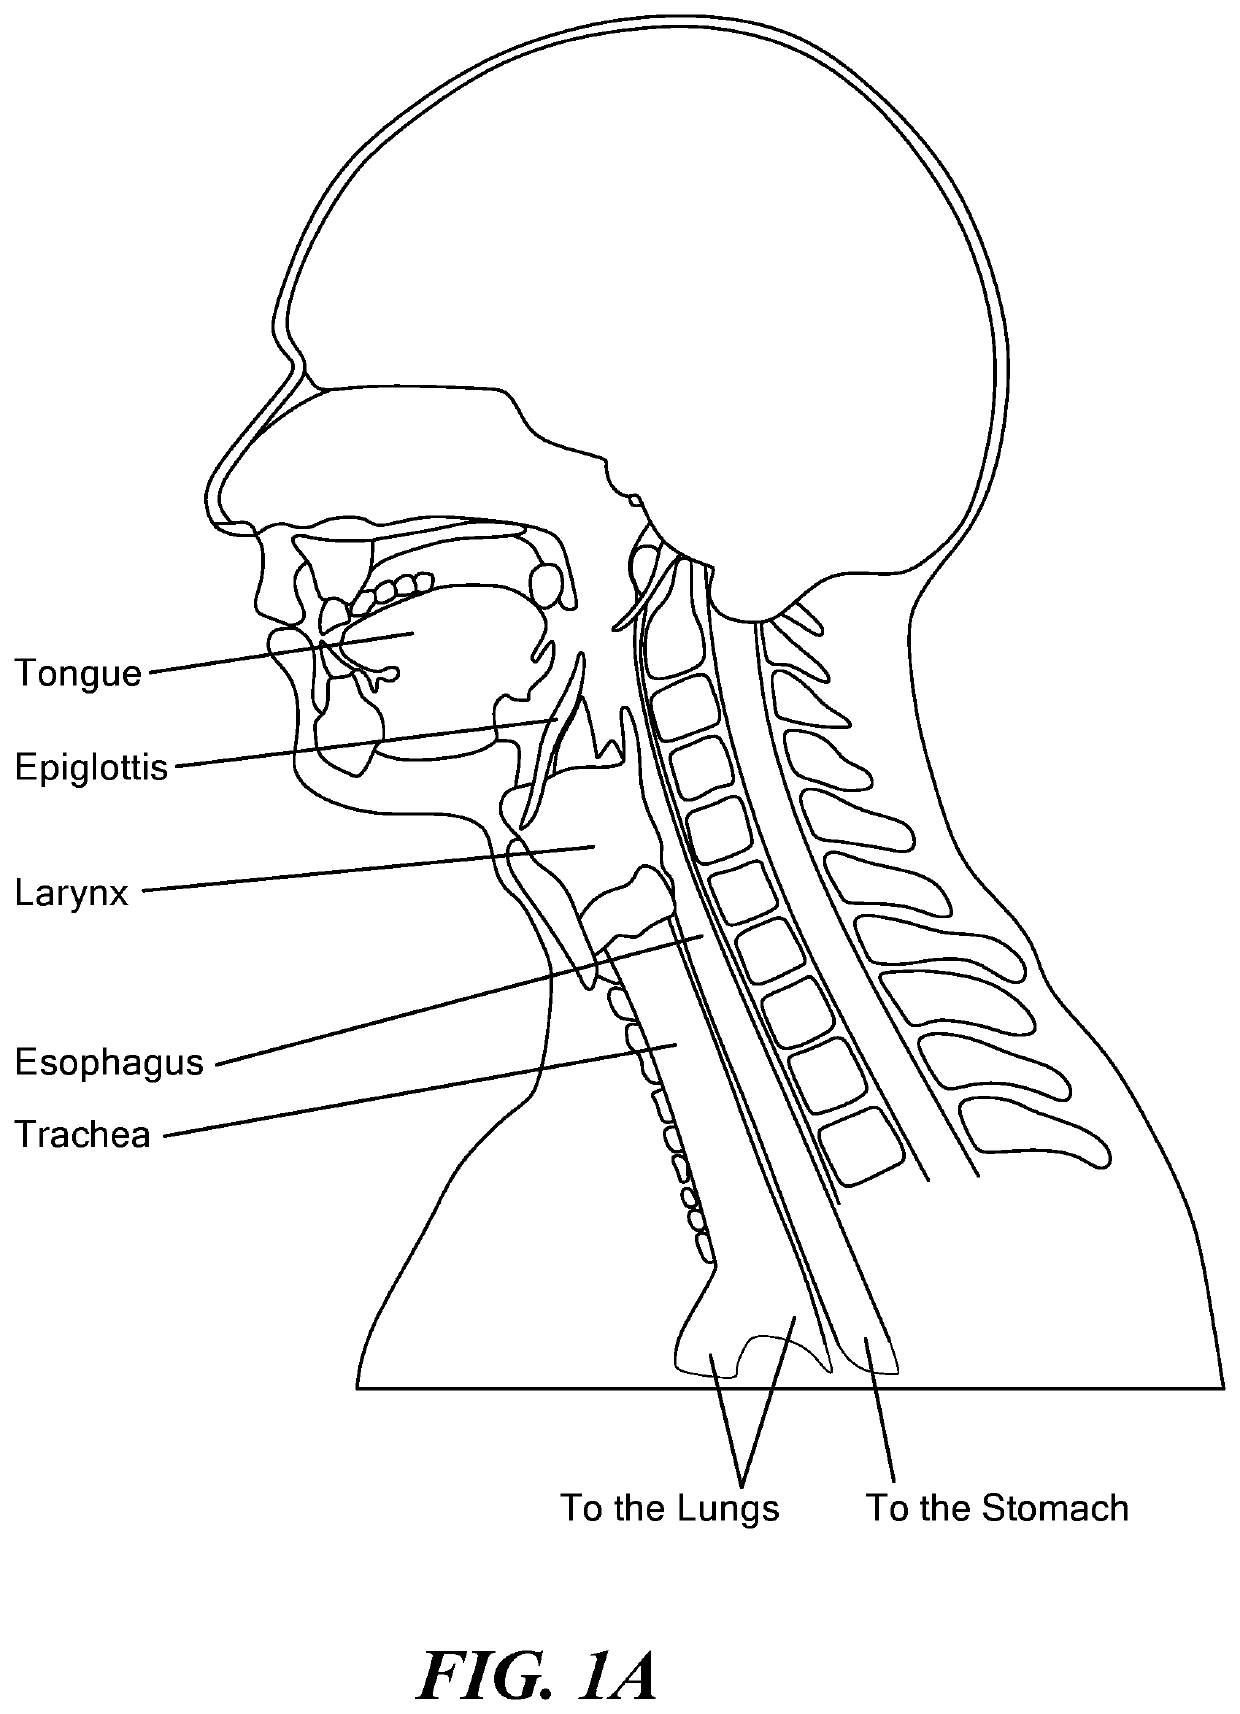 Eliciting Swallowing using Electrical Stimulation Applied via Surface Electrodes